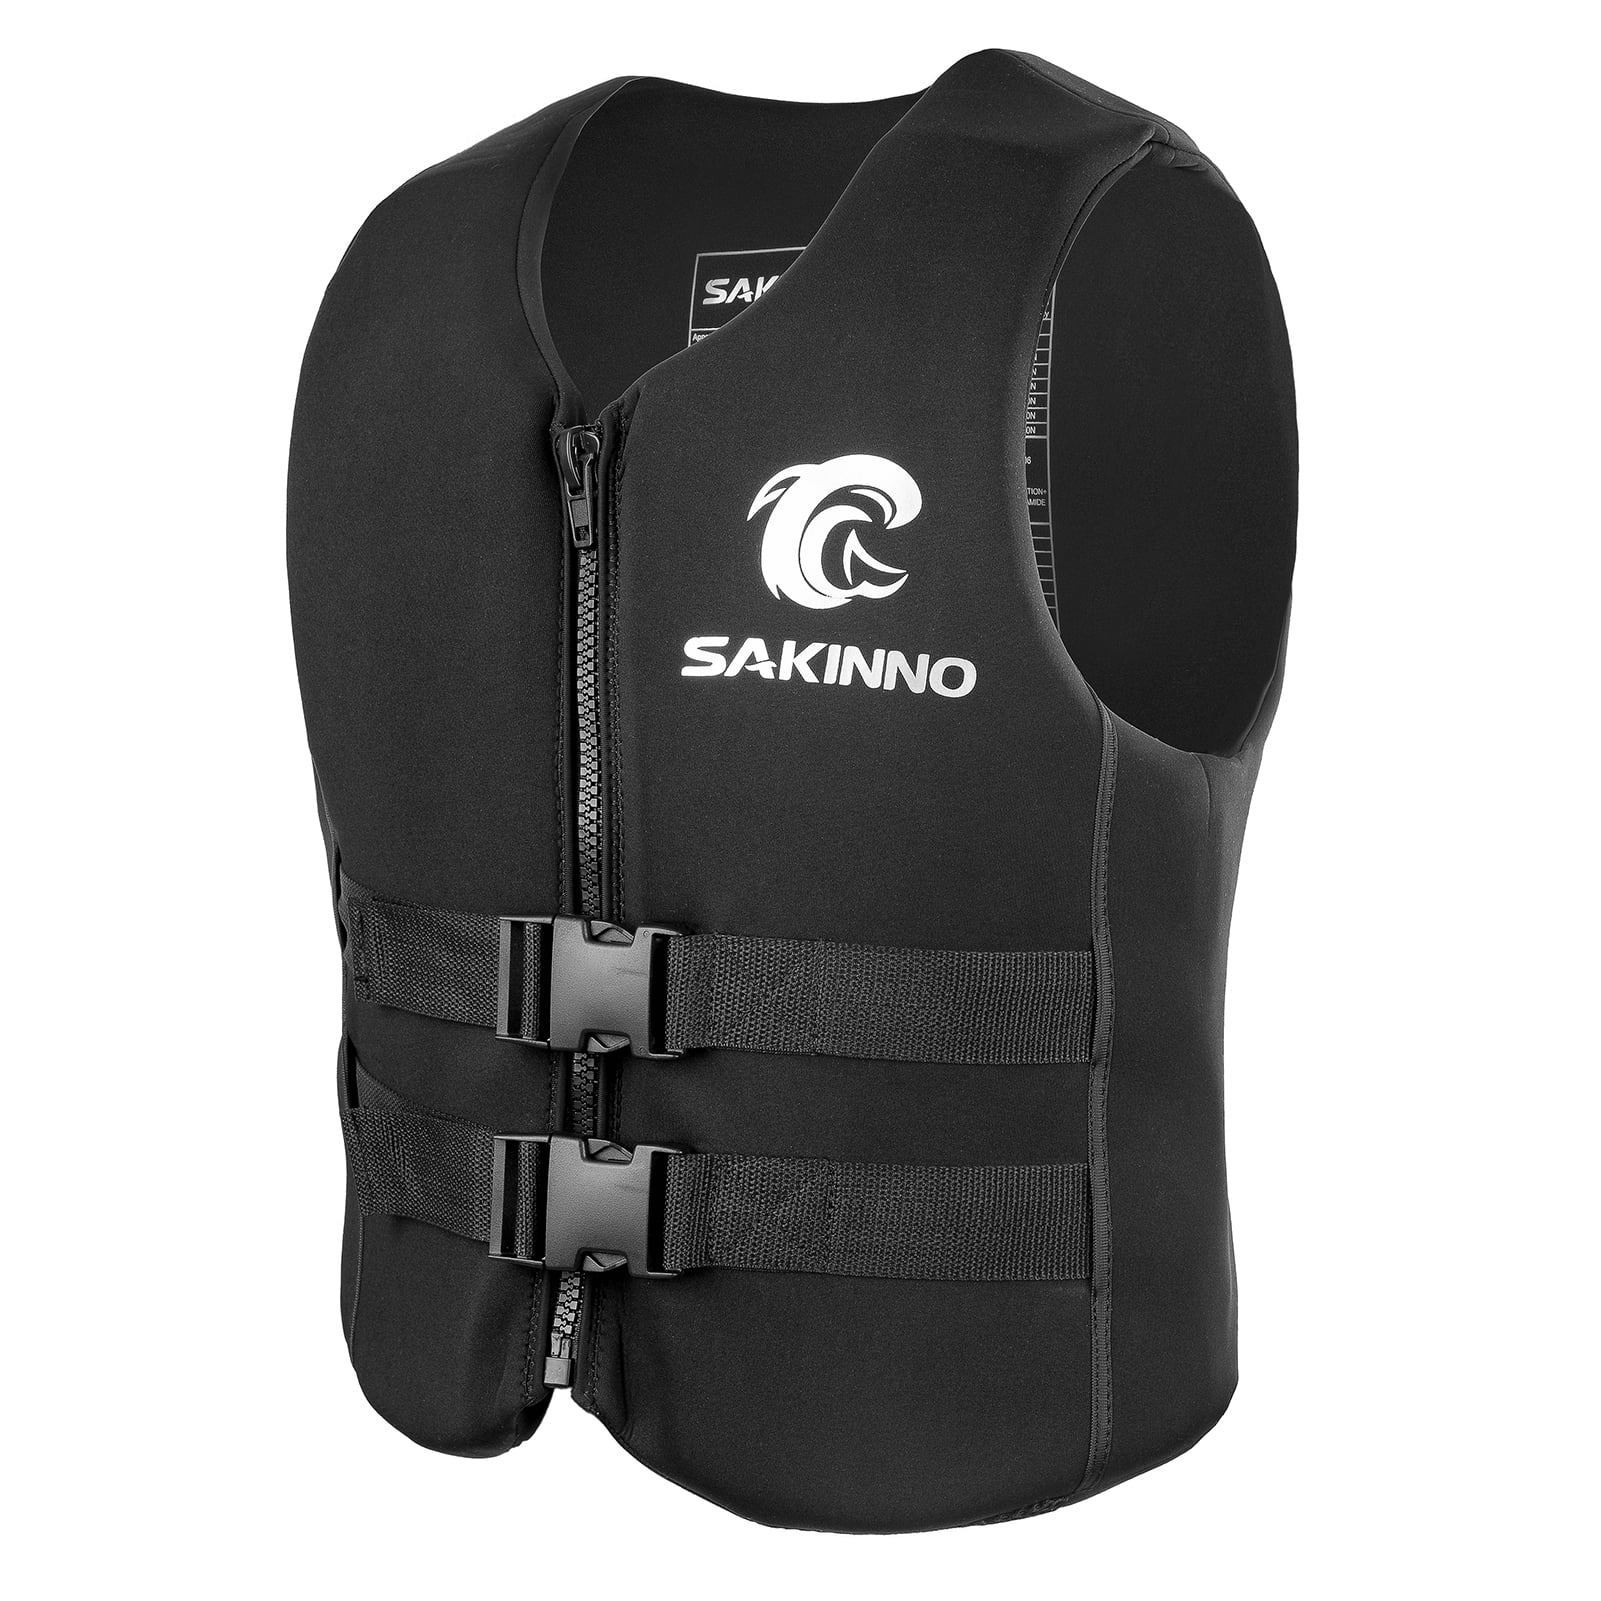 Adults Life Jacket Safety Neoprene Surfing Diving Survival Swimming Vest I4F2 